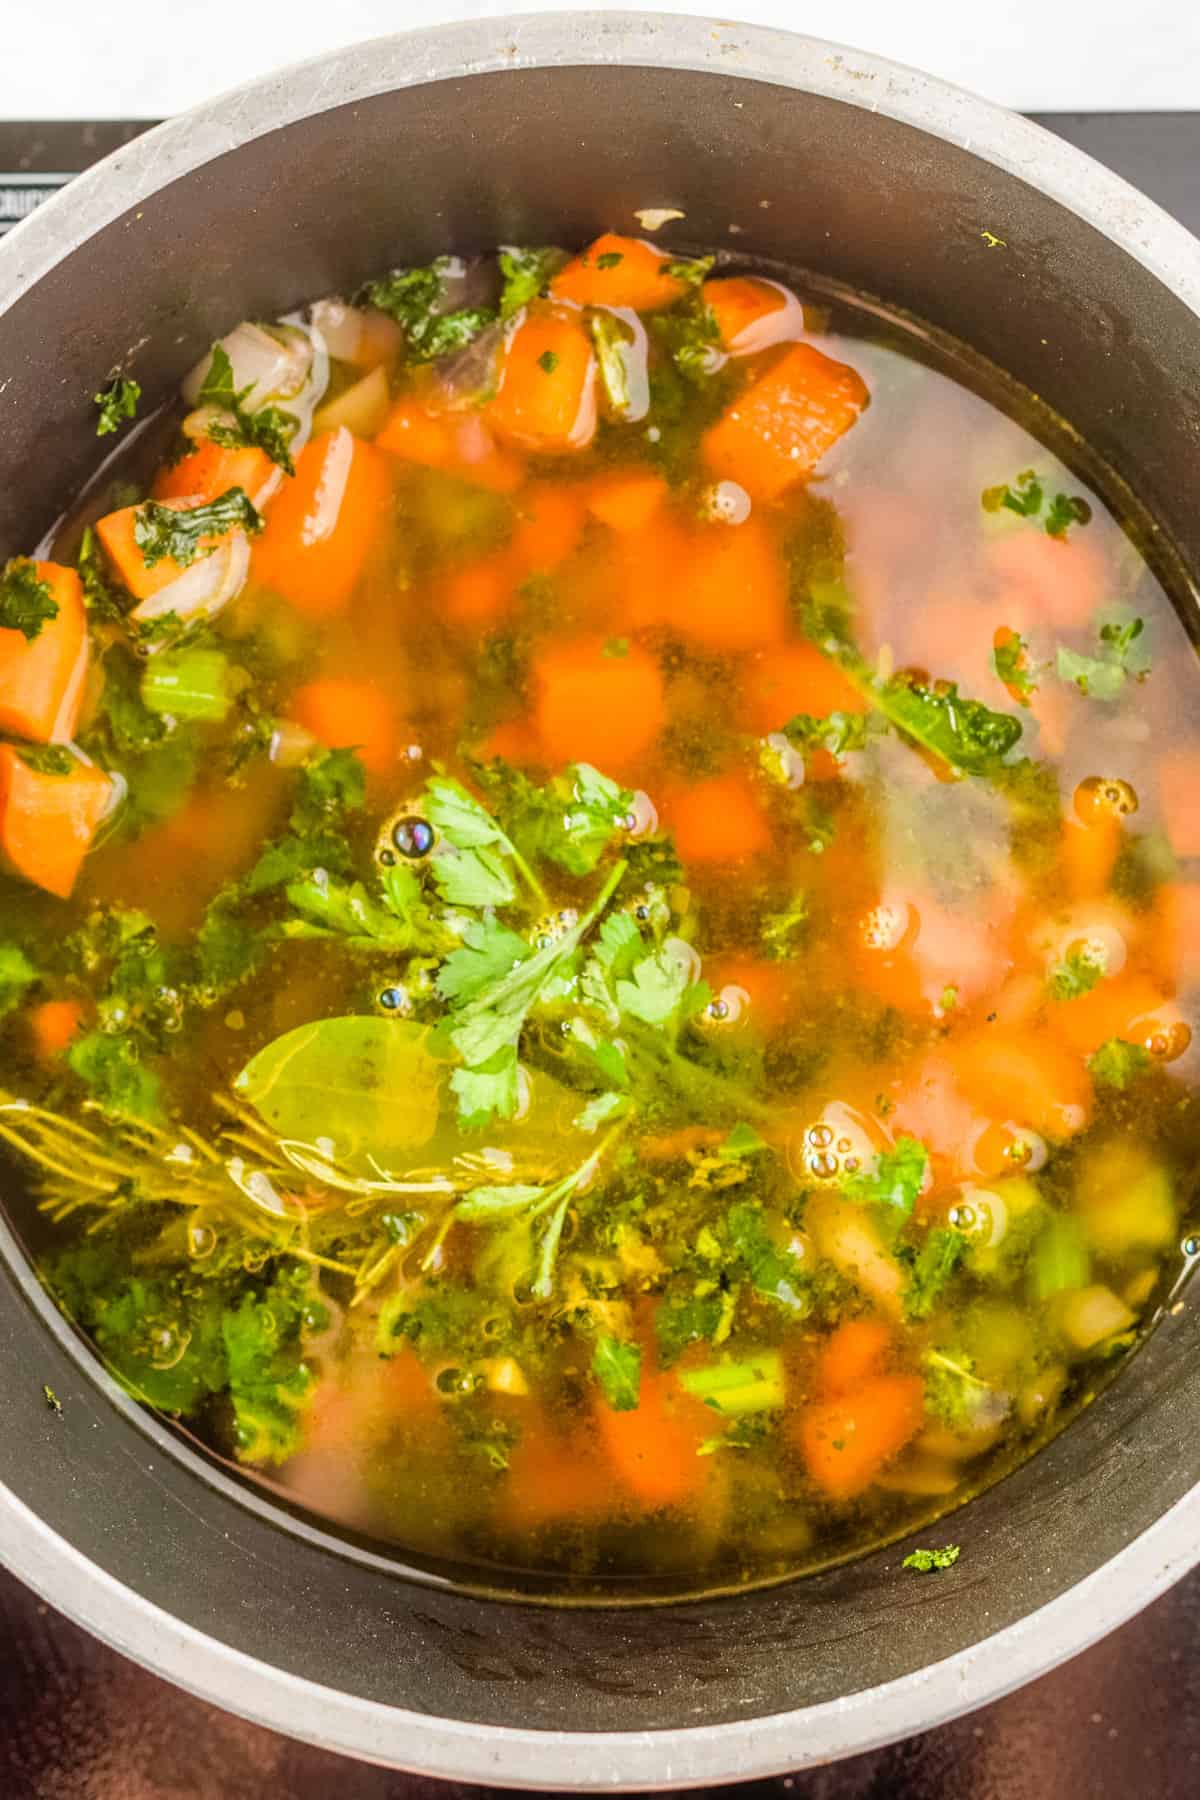 Overhead view of a large pot with stirred shallots, carrots, celery, and chard stalks, and garlic added with broth and bouquet garni.